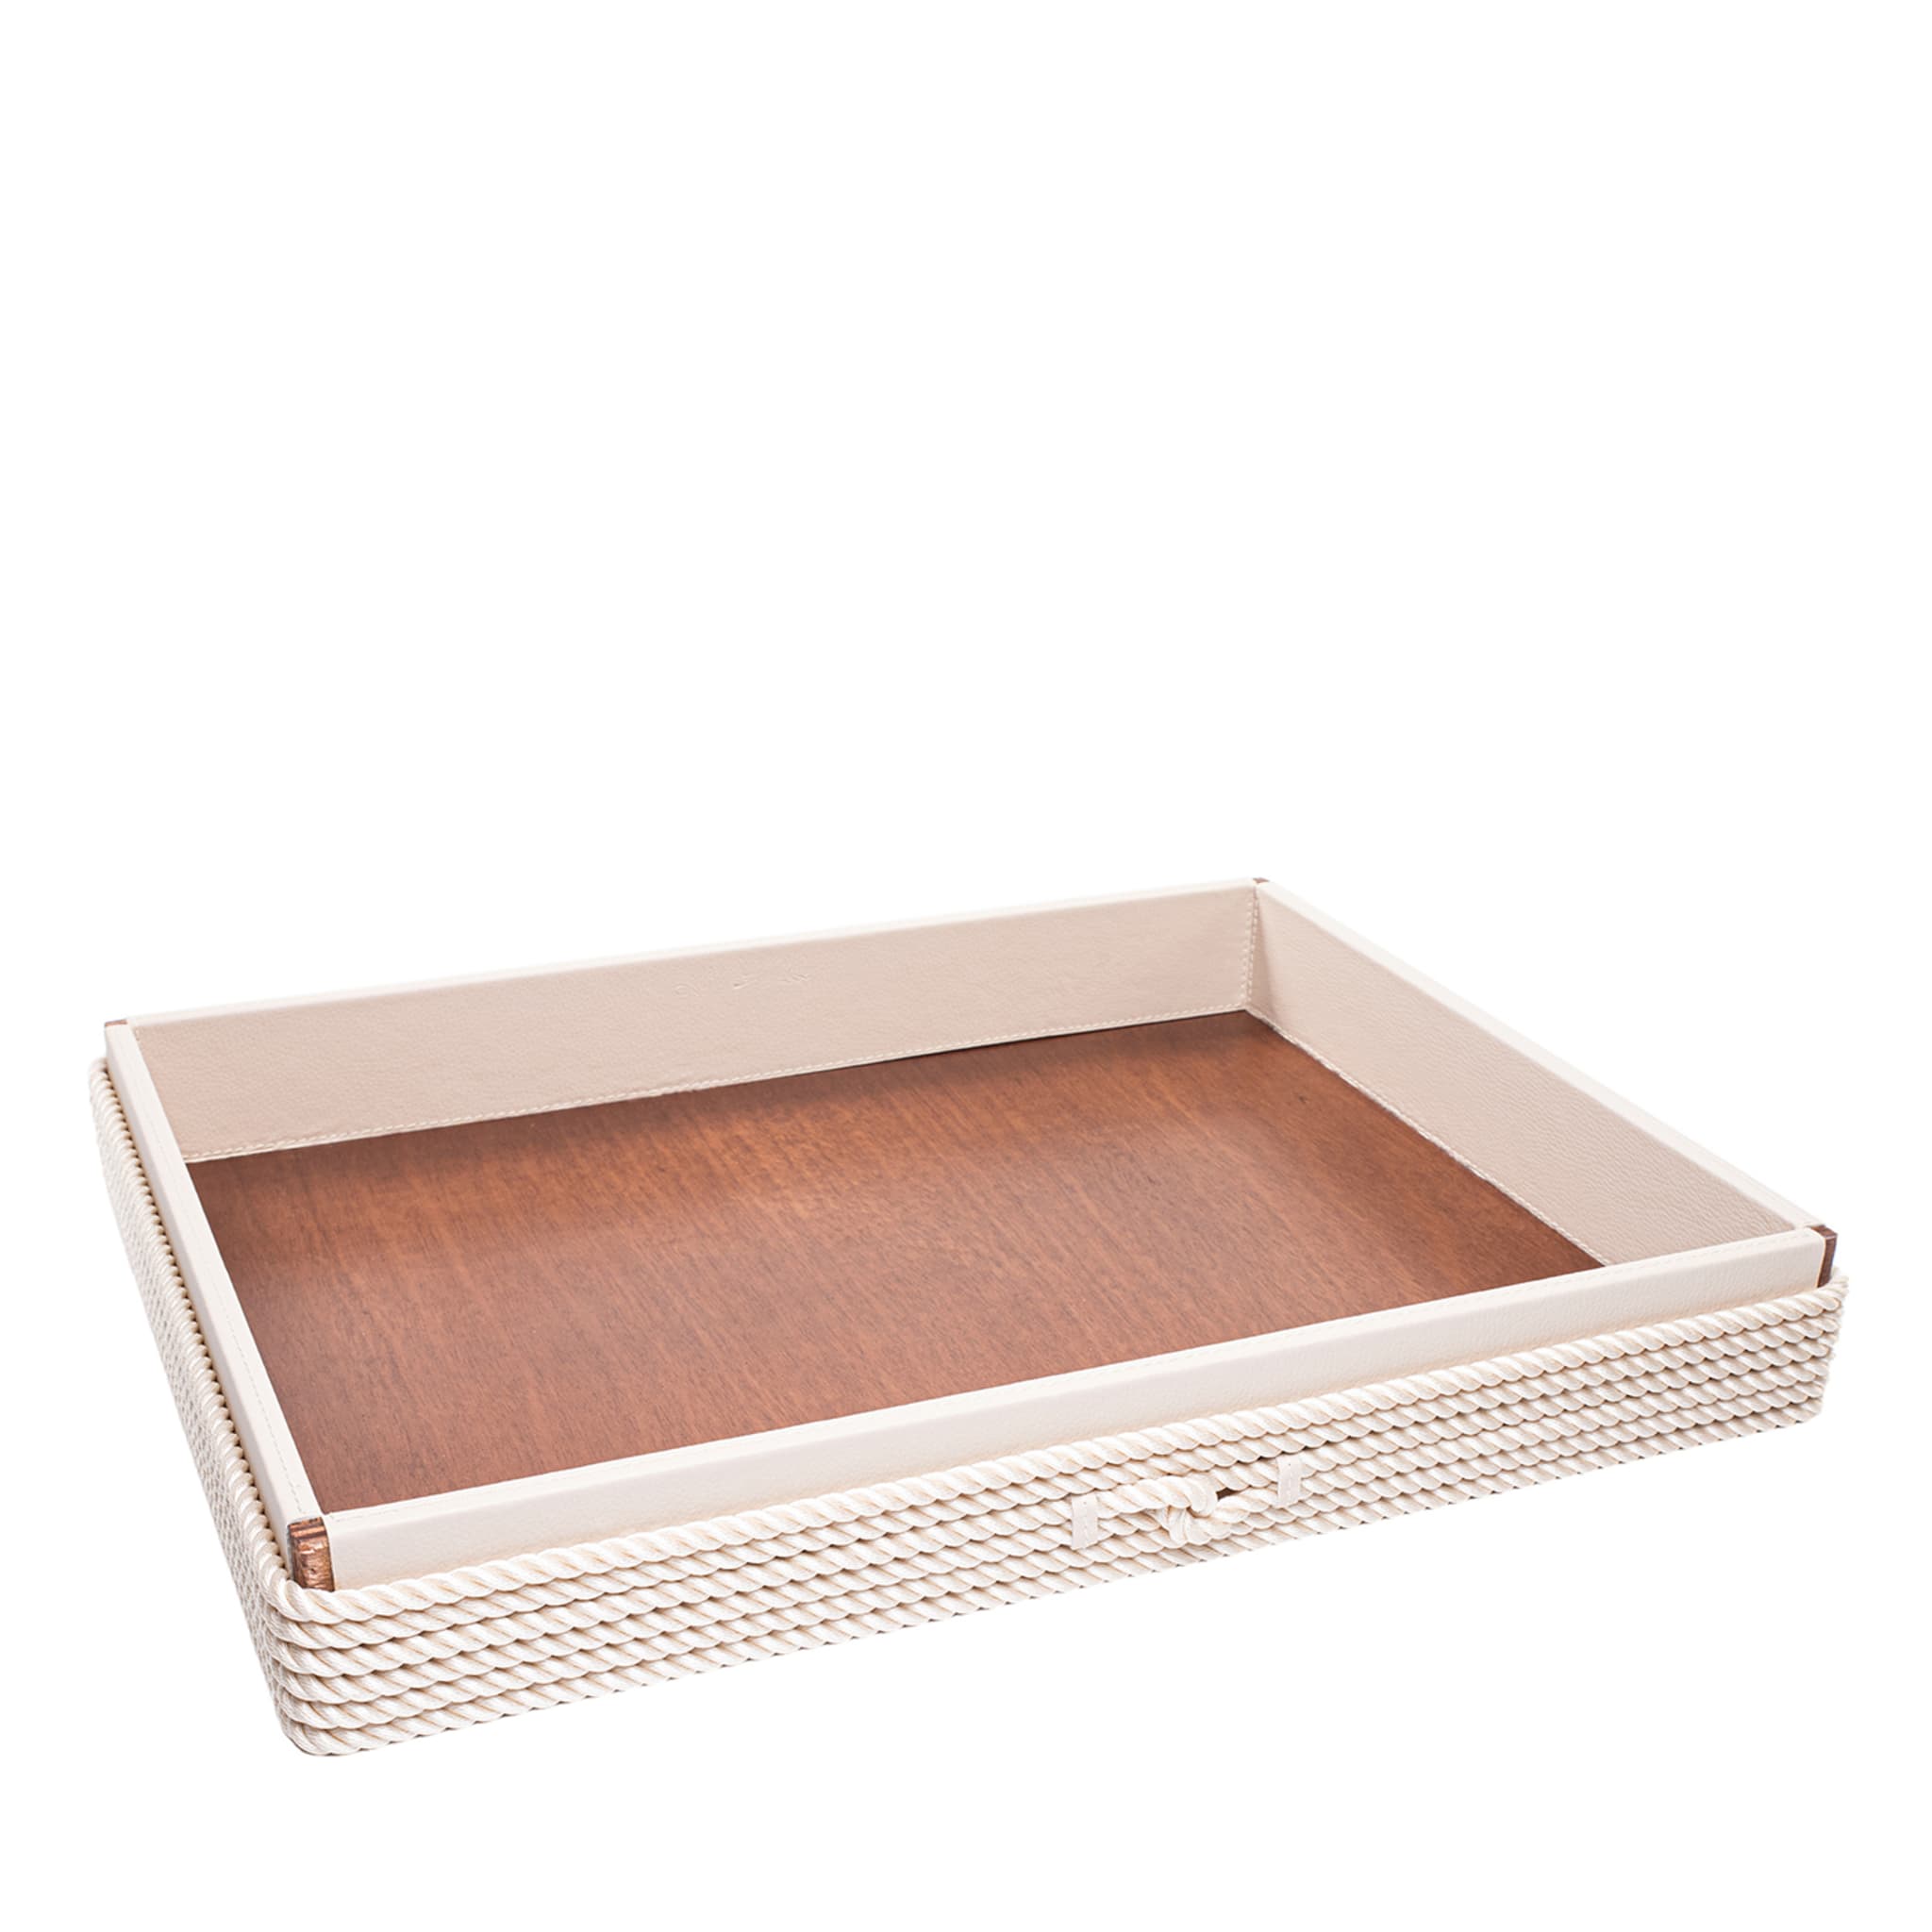 Extra-Large Rectangular Cream Tray with Rope Inserts - Main view